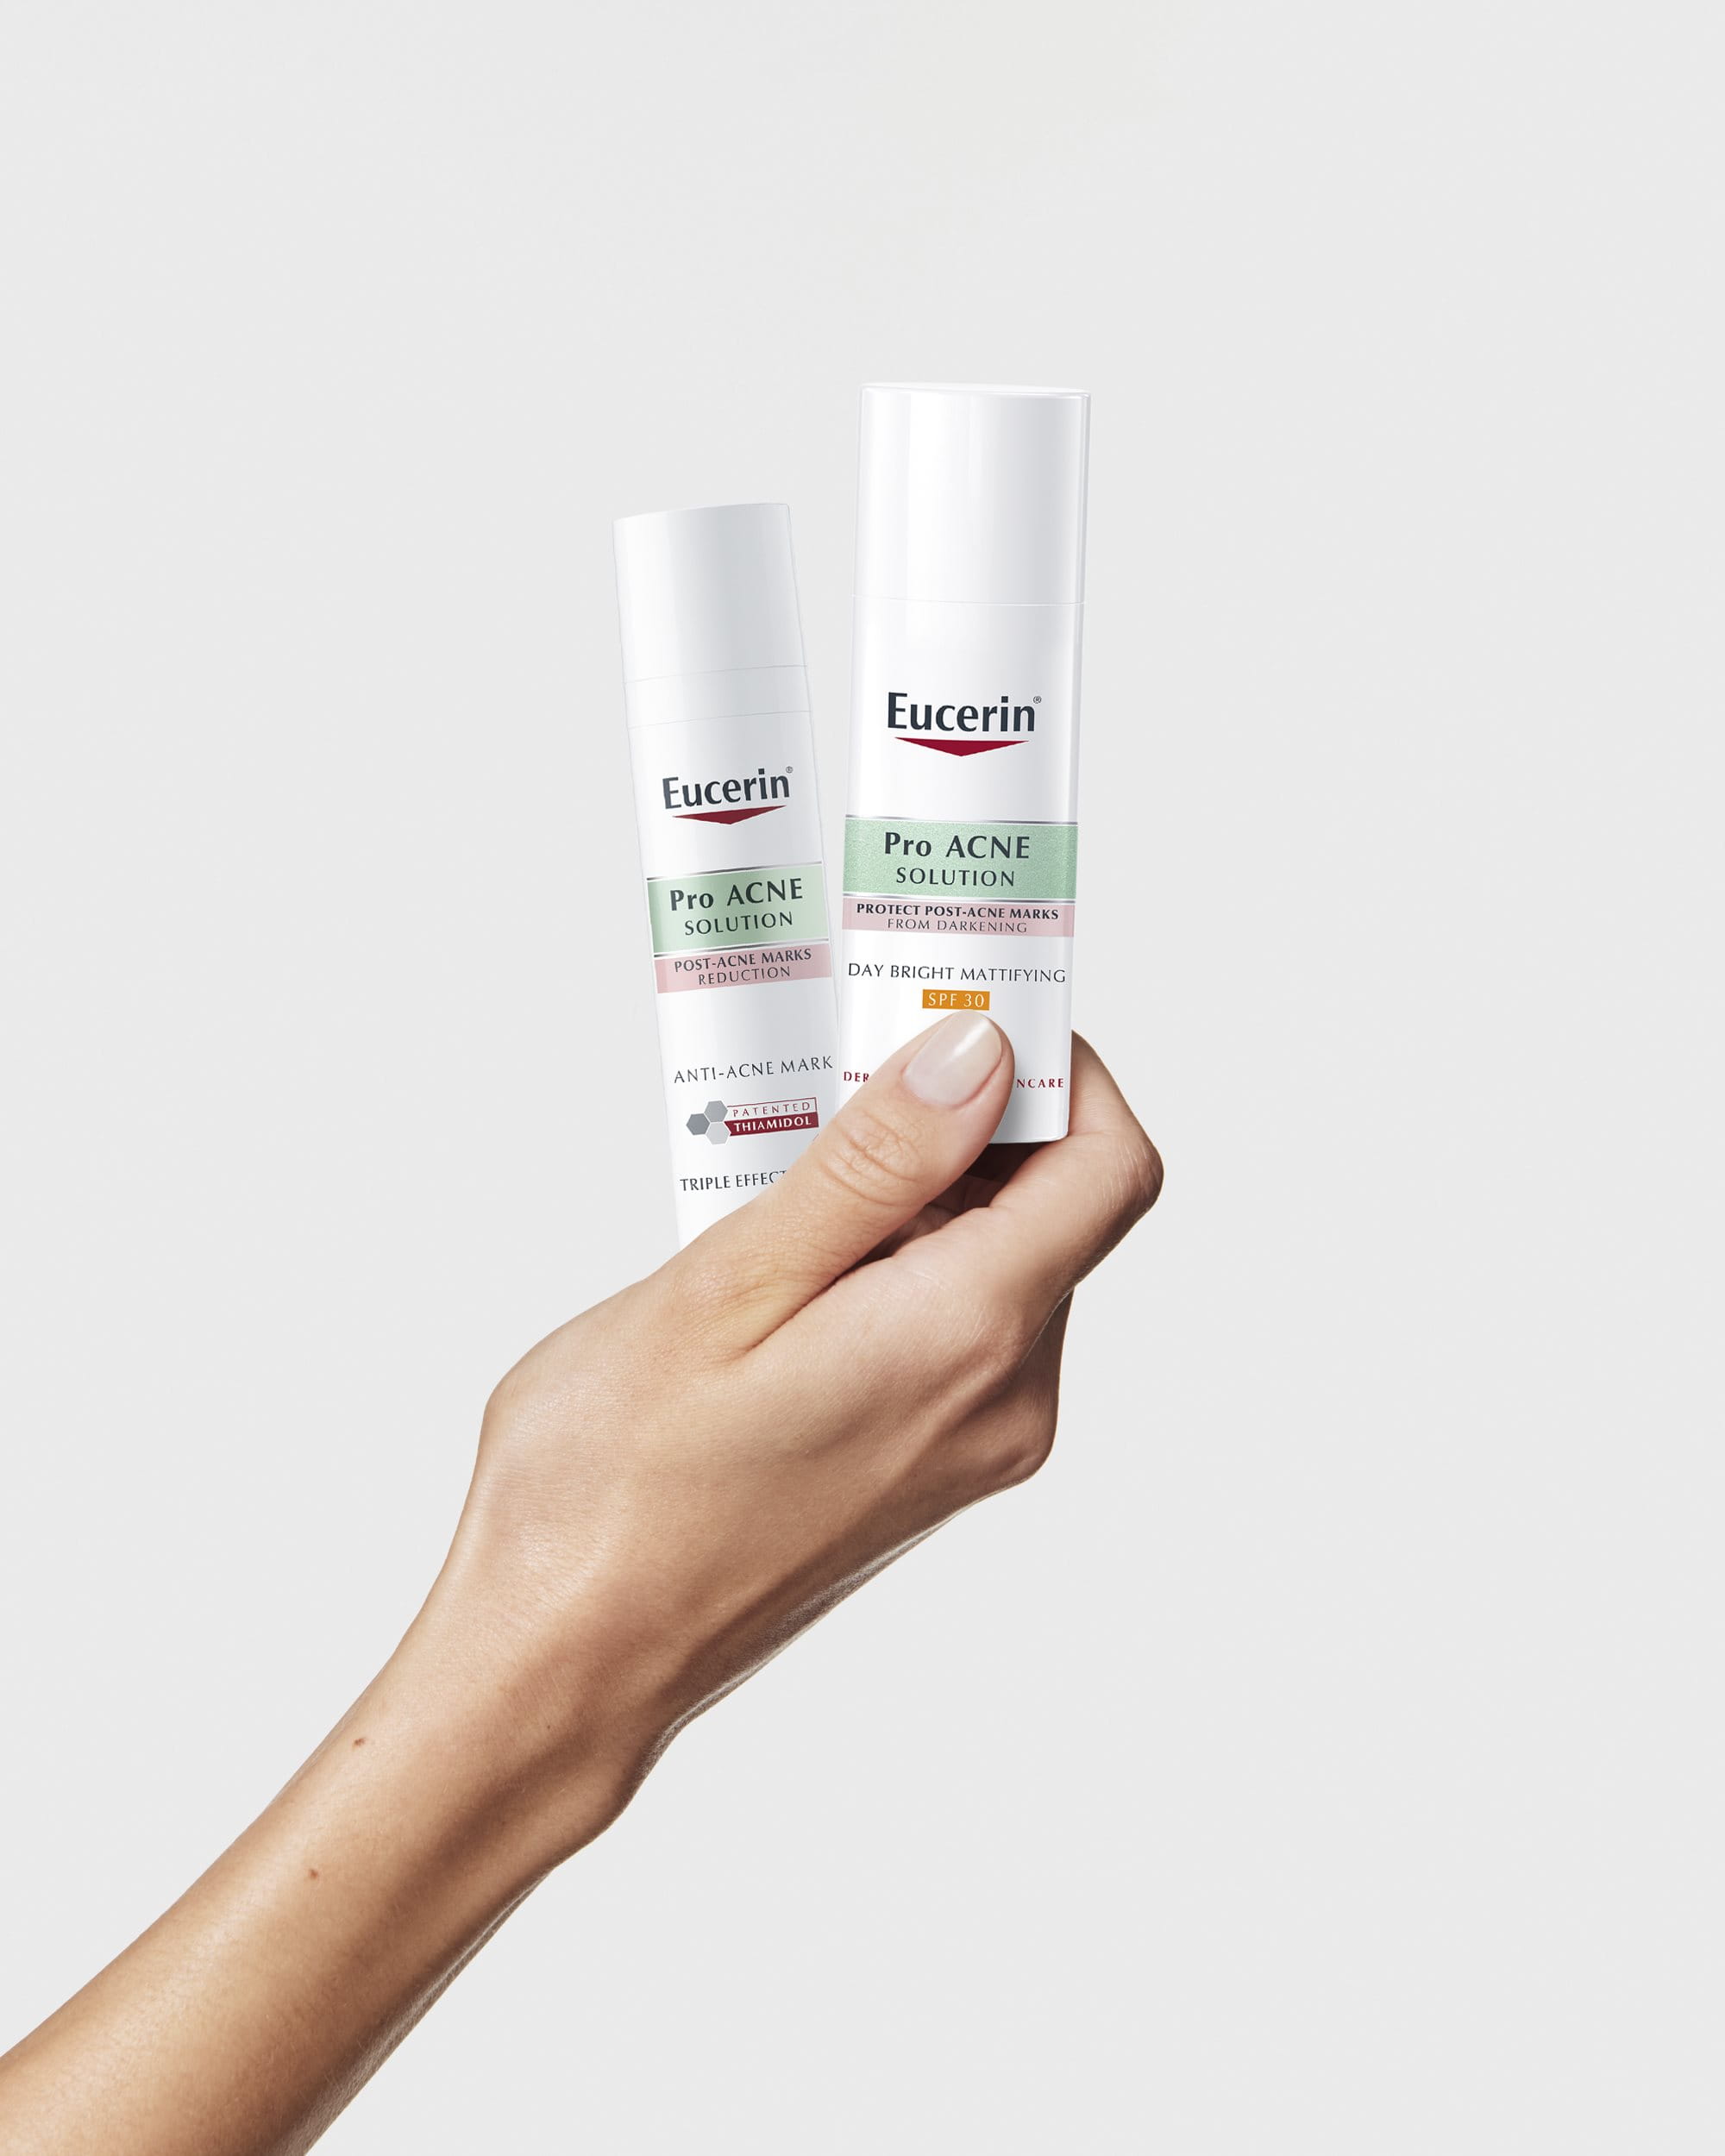 ProACNE solution products